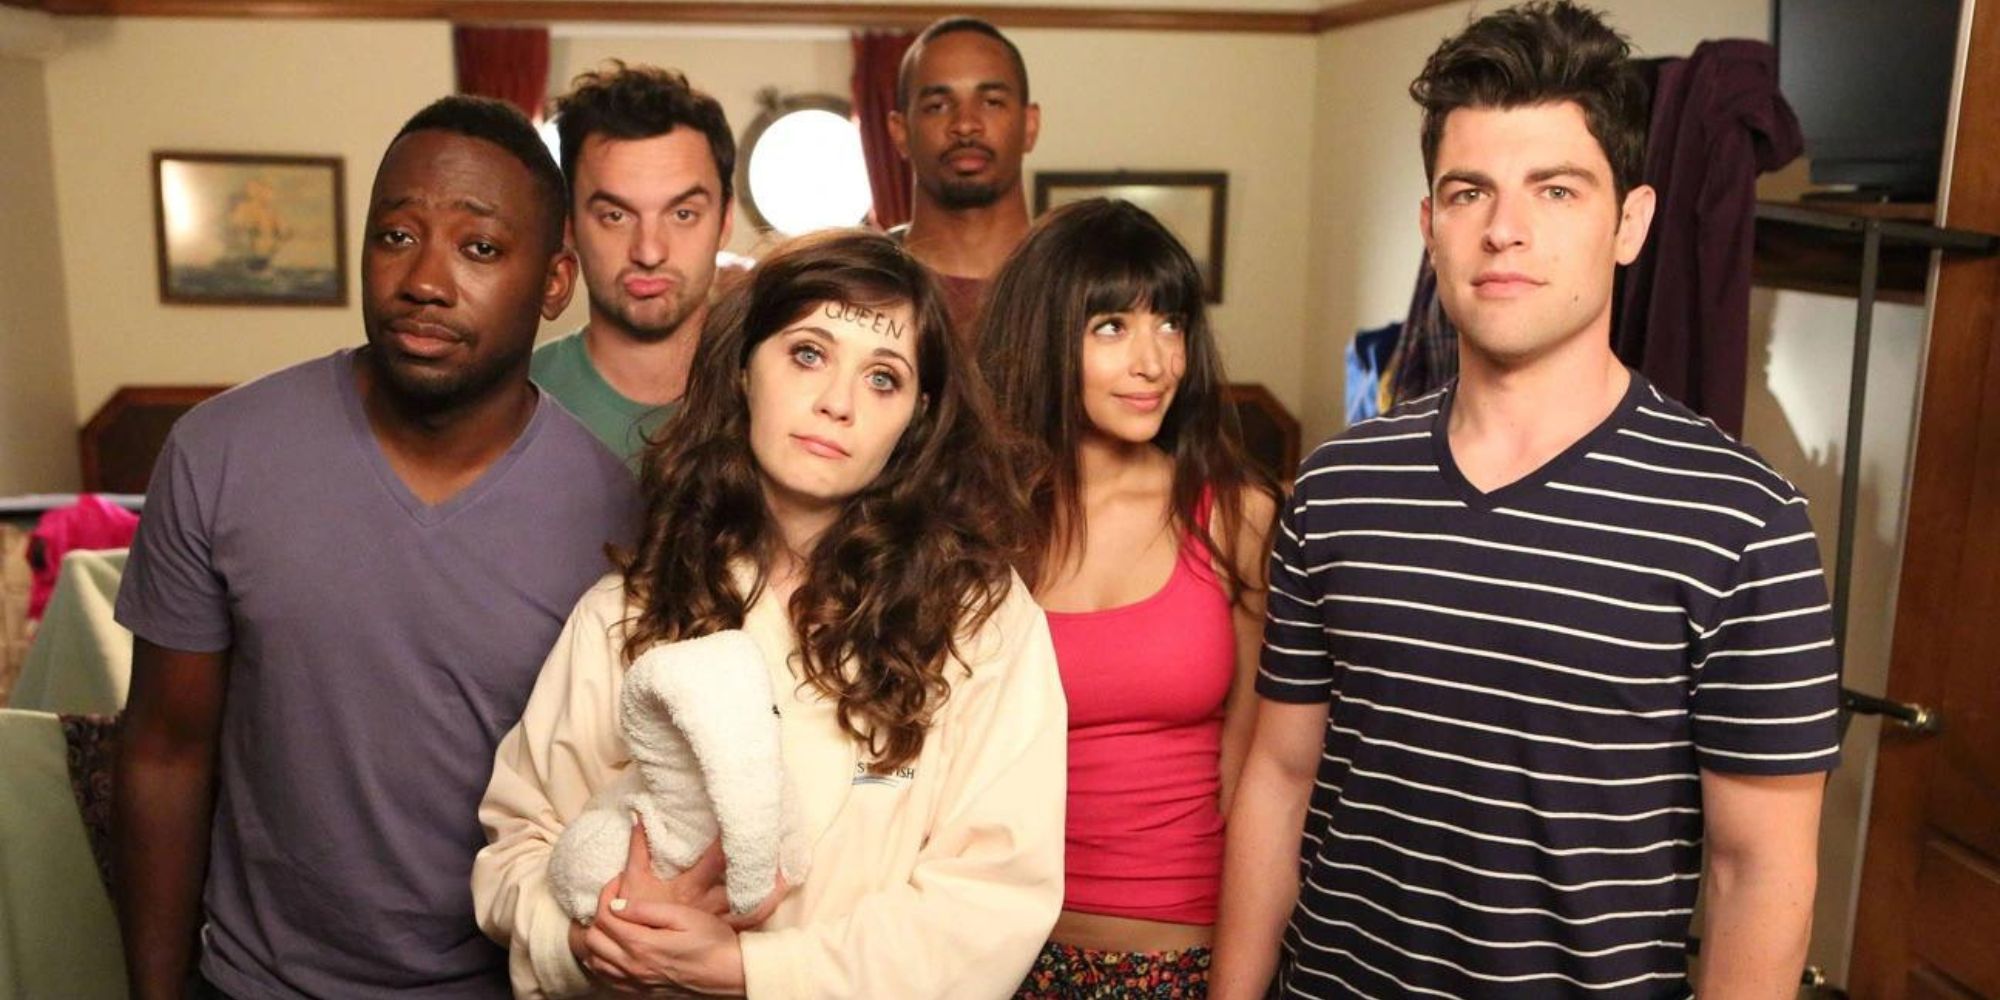 The cast of New Girl standing together